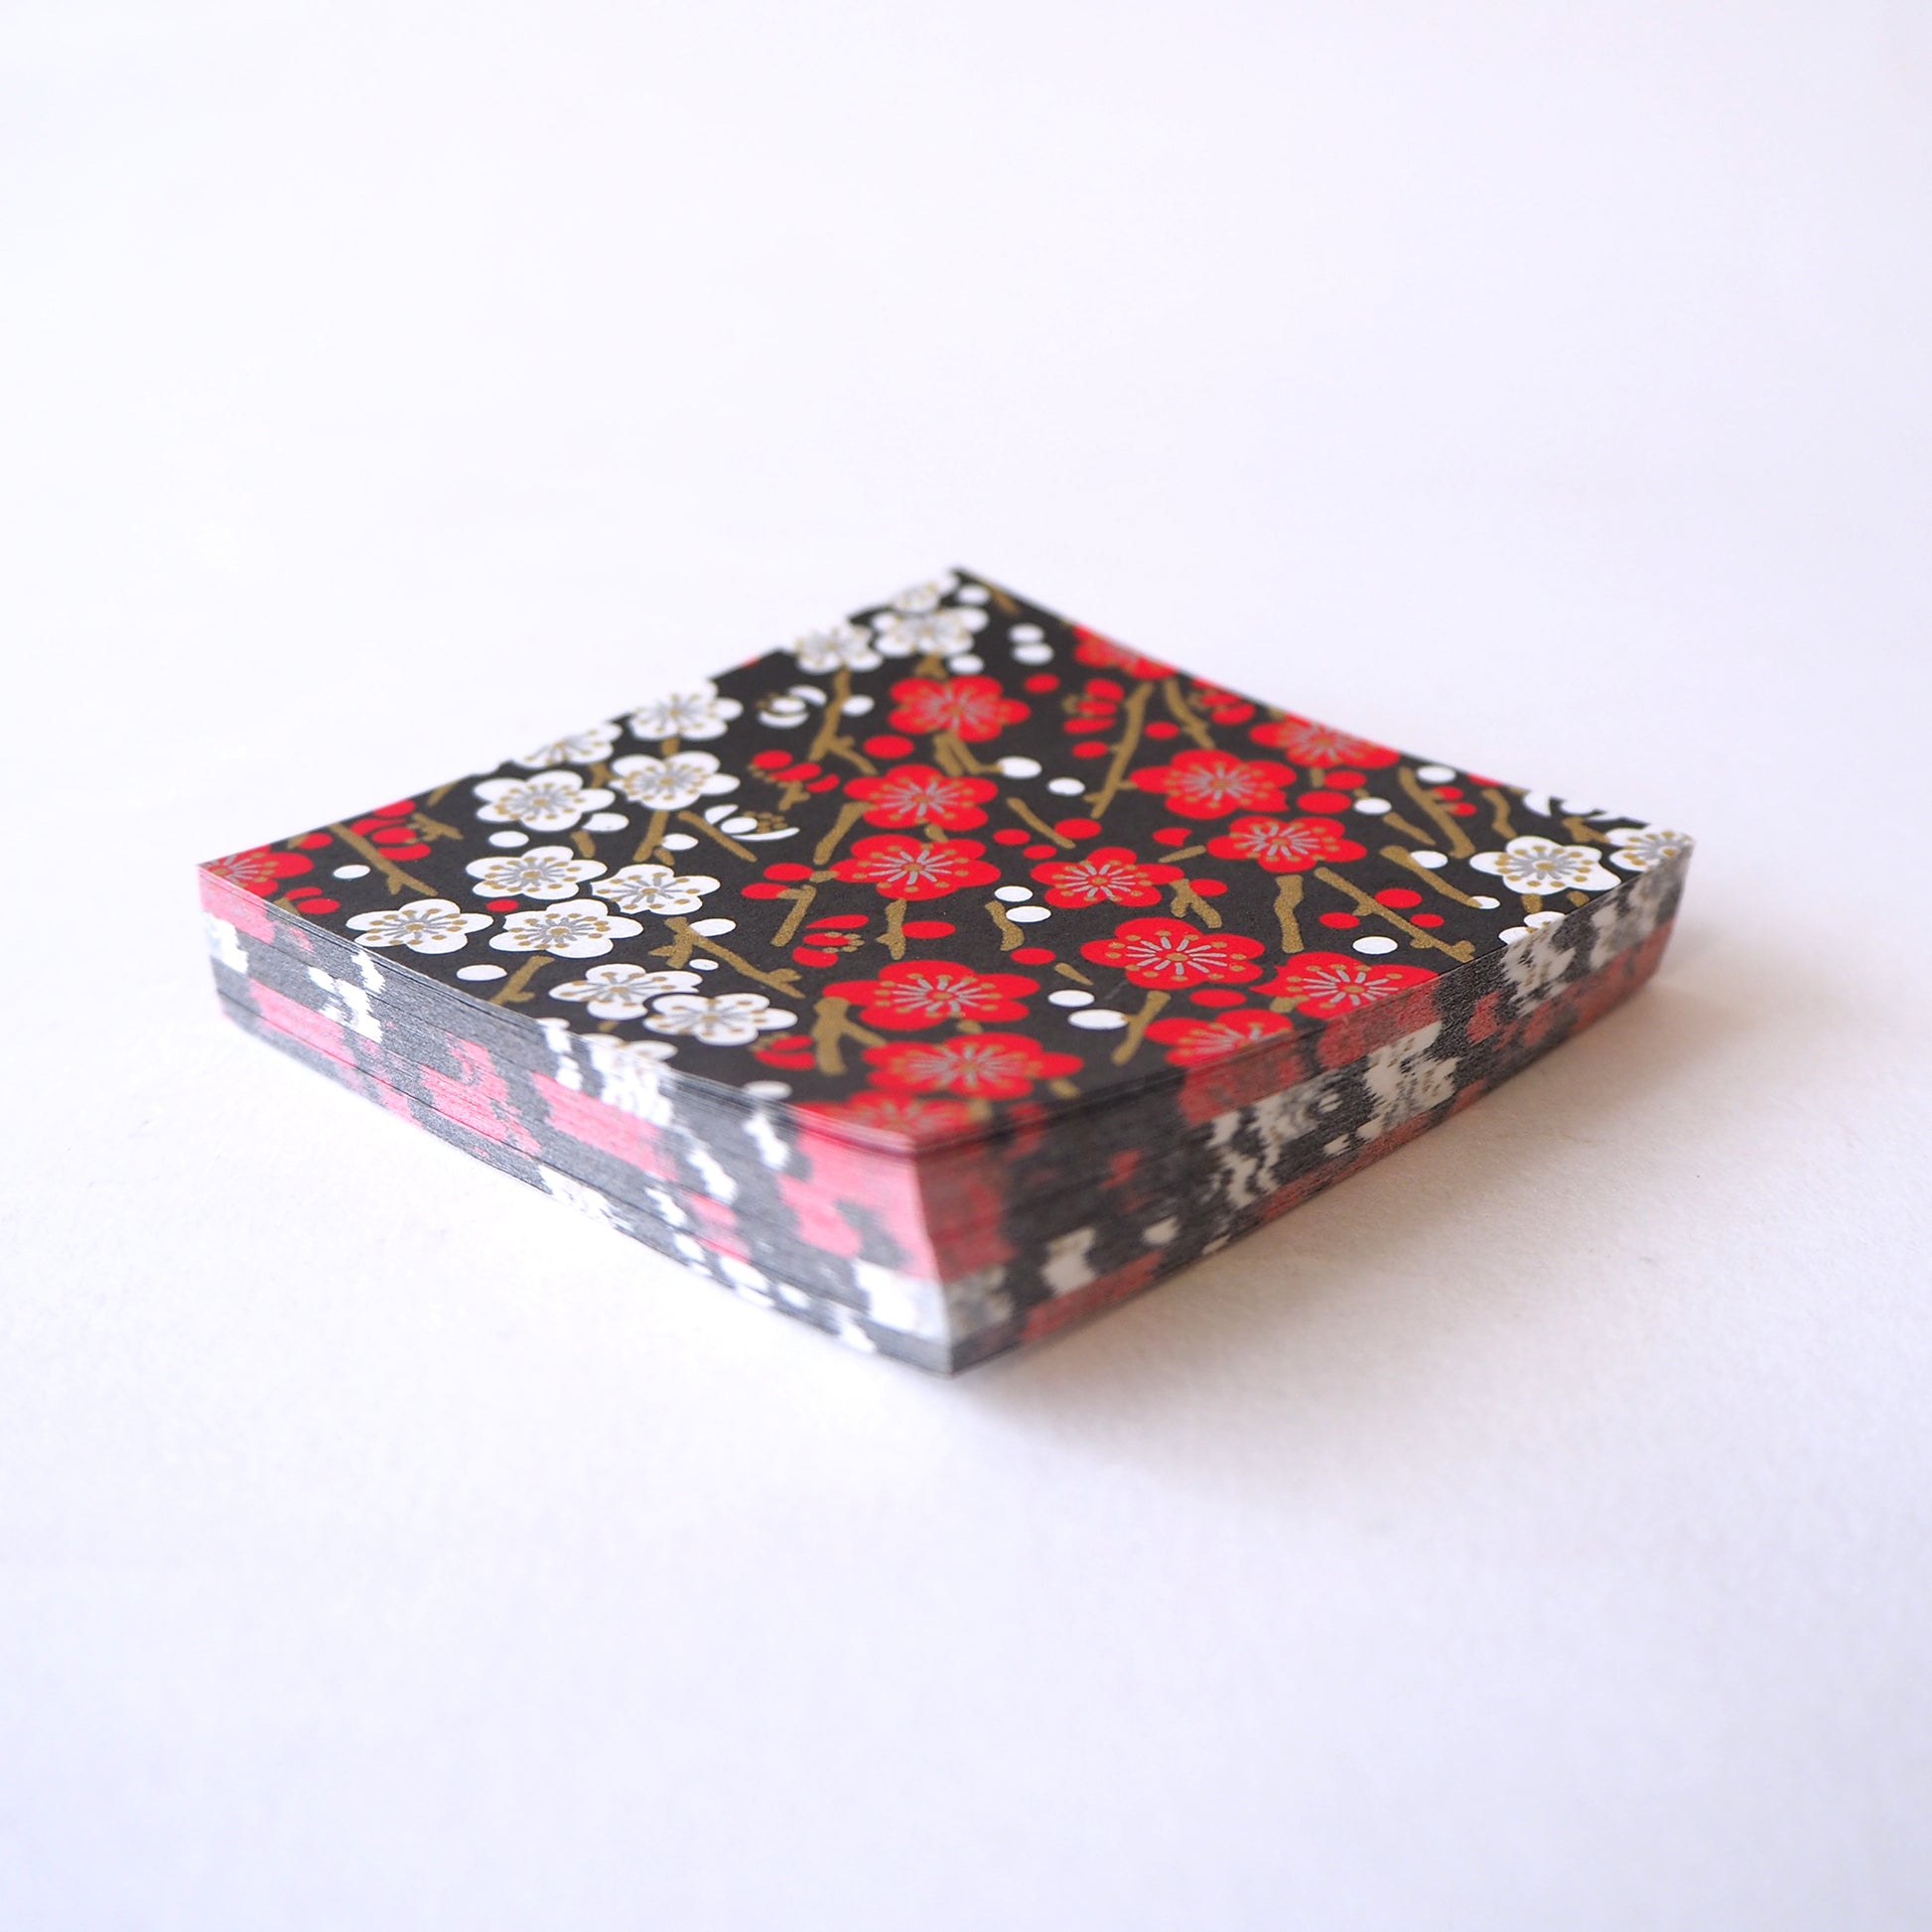 Pack of 100 Sheets 7x7cm Yuzen Washi Origami Paper HZ-382 - Red White Plum Flower Black - washi paper - Lavender Home London